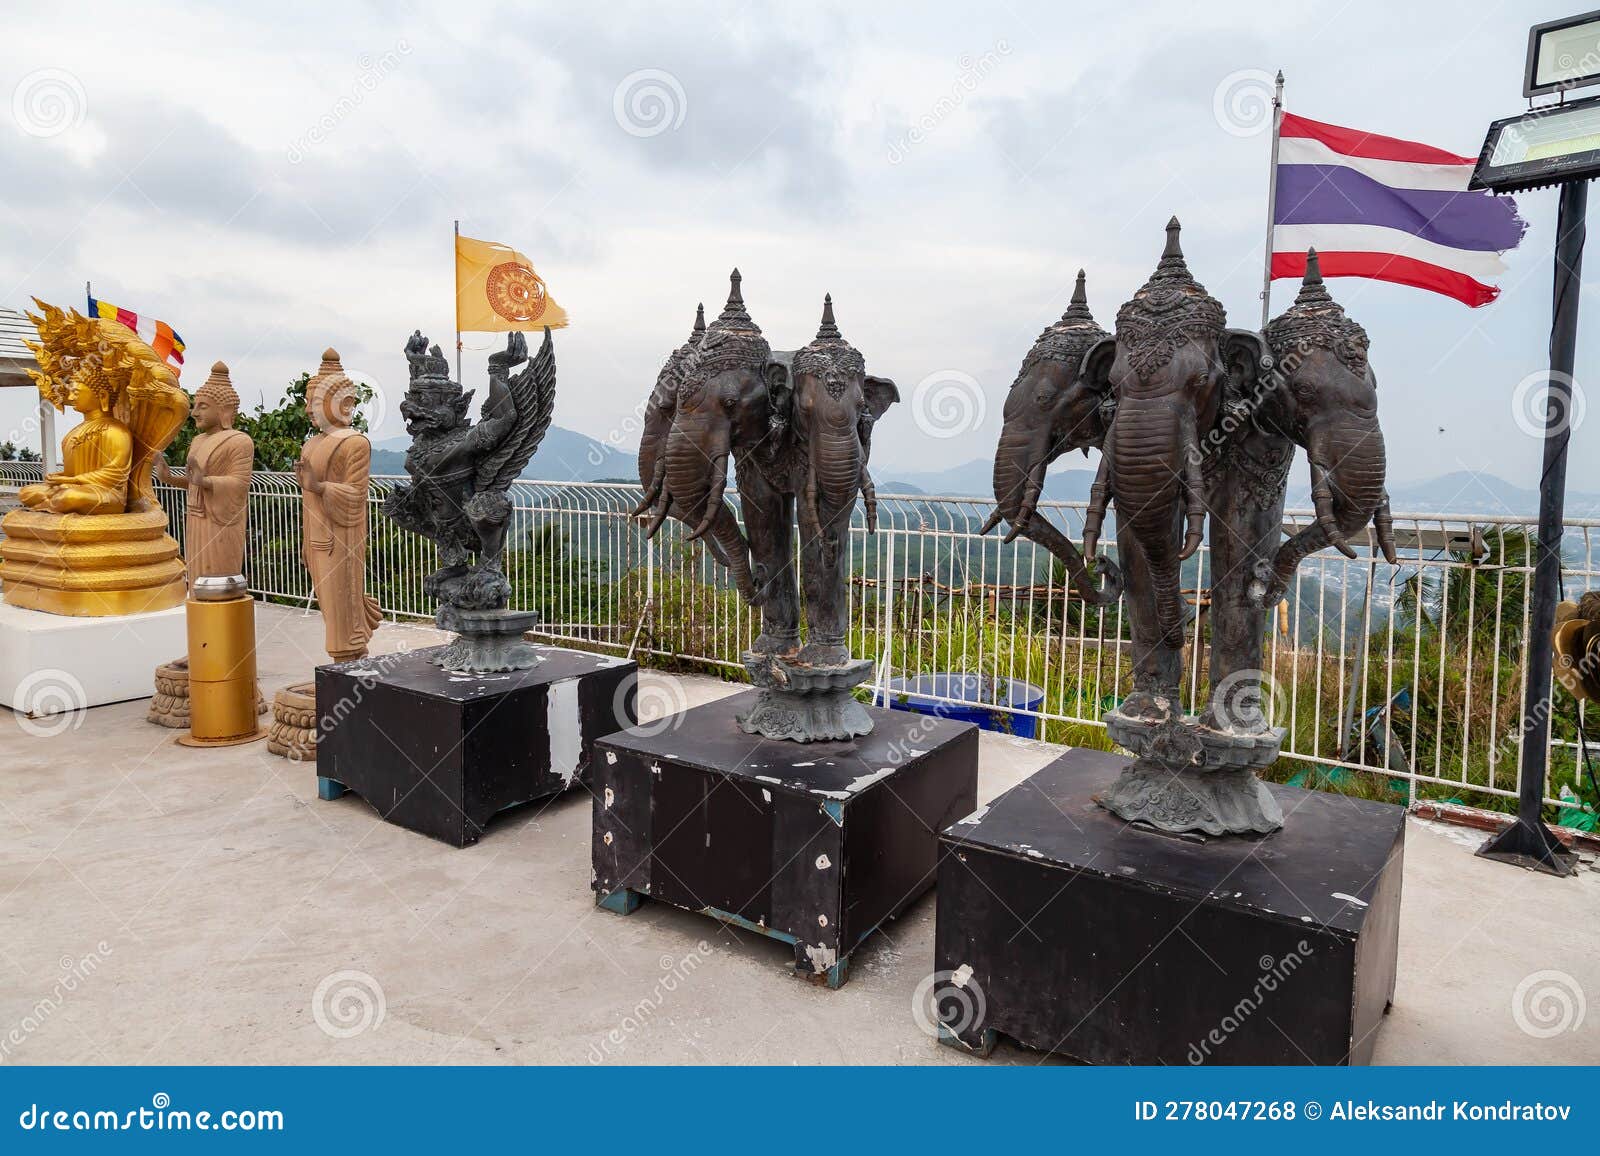 Statues of the Three-headed Elephant Airavata, the King of All ...